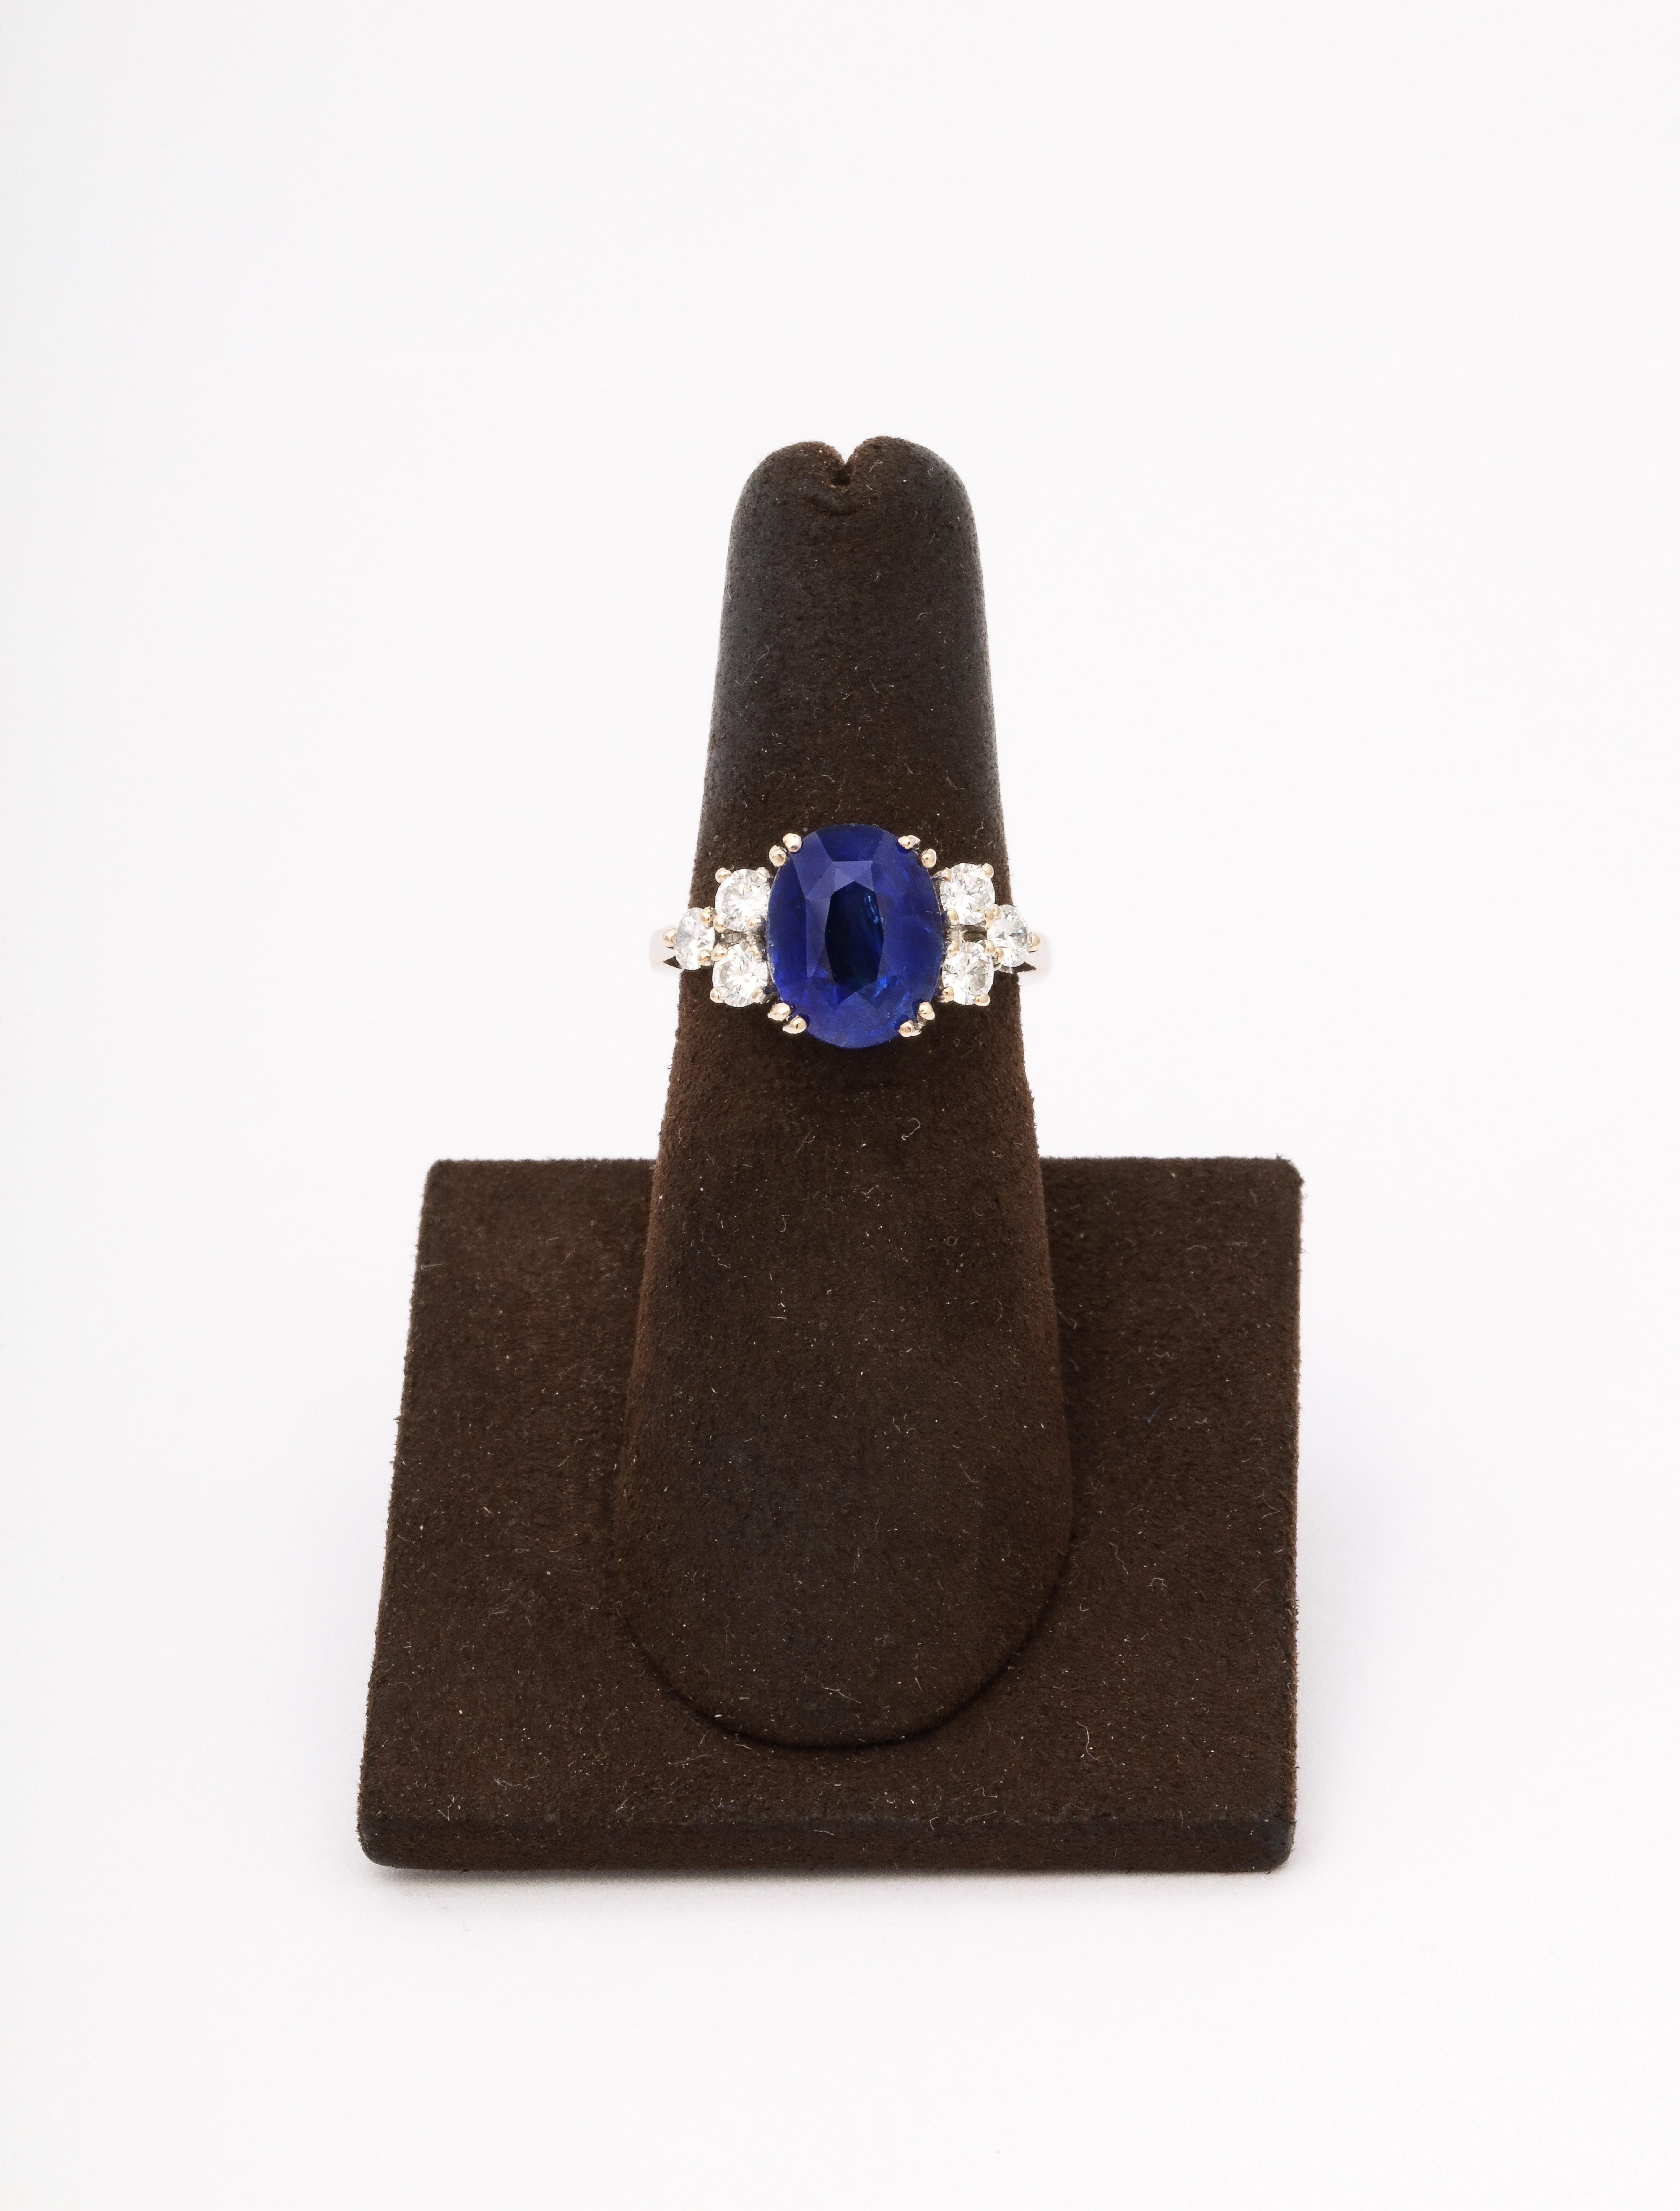 
4.54 carat Certified “Intense Blue” Ceylon Oval Sapphire set with .70 carats of white round brilliant cut diamonds. 

Set in 18k white gold 

The ring is currently a size 5.75 - it can be resized to any finger size. 

Certified by Christian